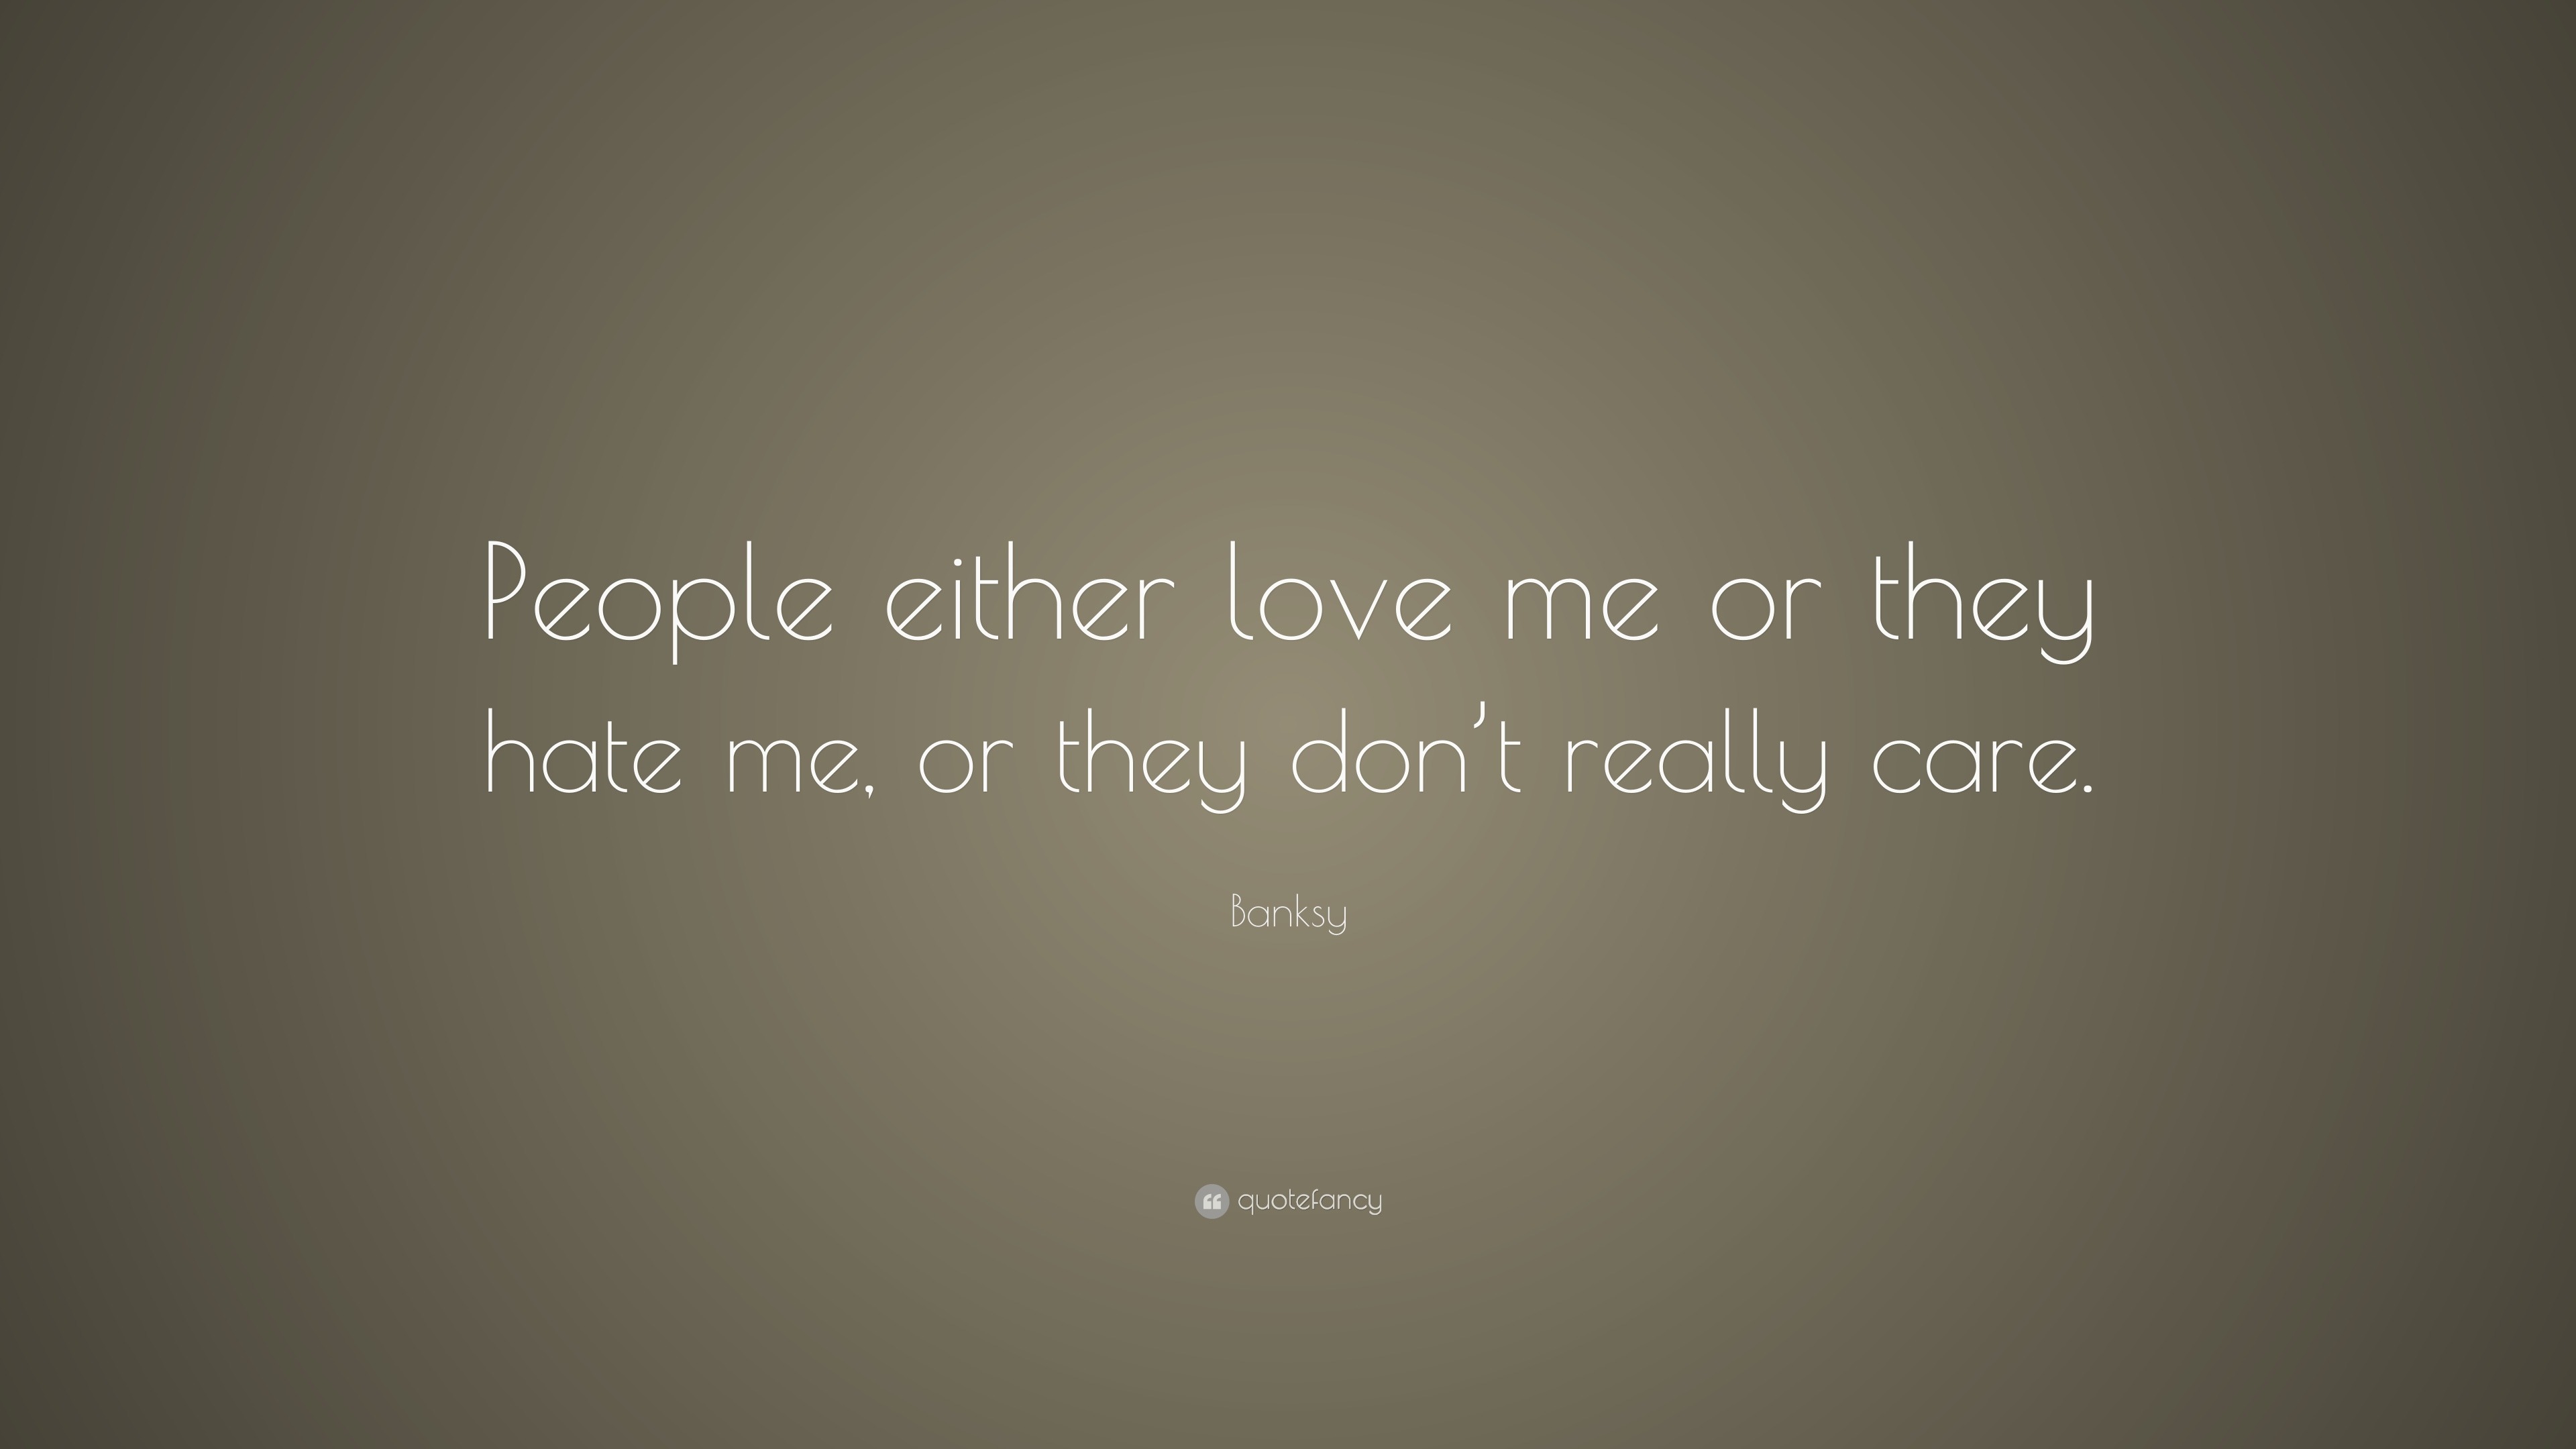 Banksy Quote “People either love me or they hate me or they don